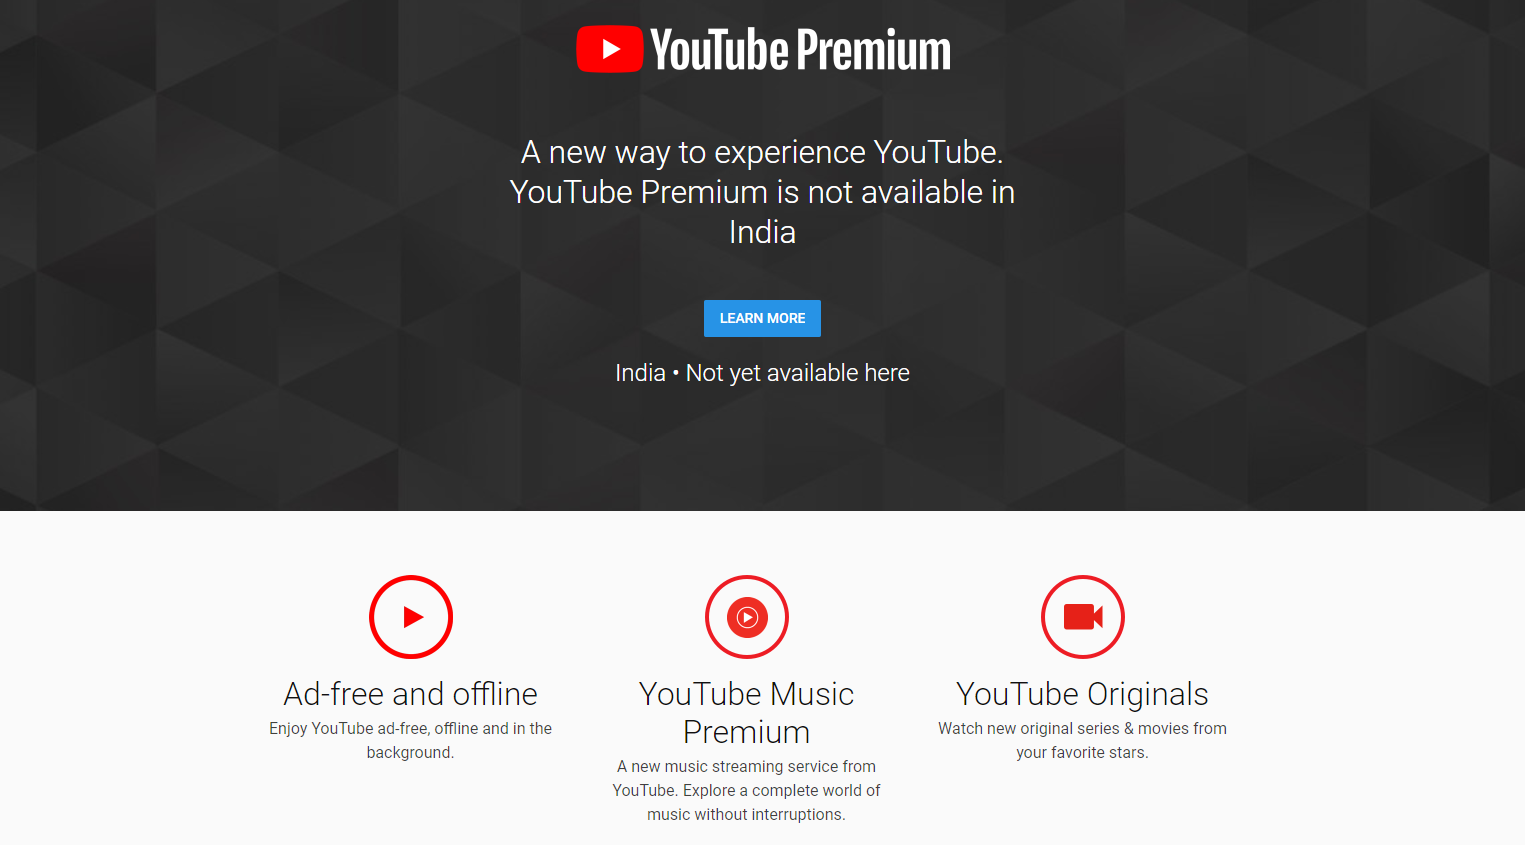 do youtubers make more money from youtube premium subscribers